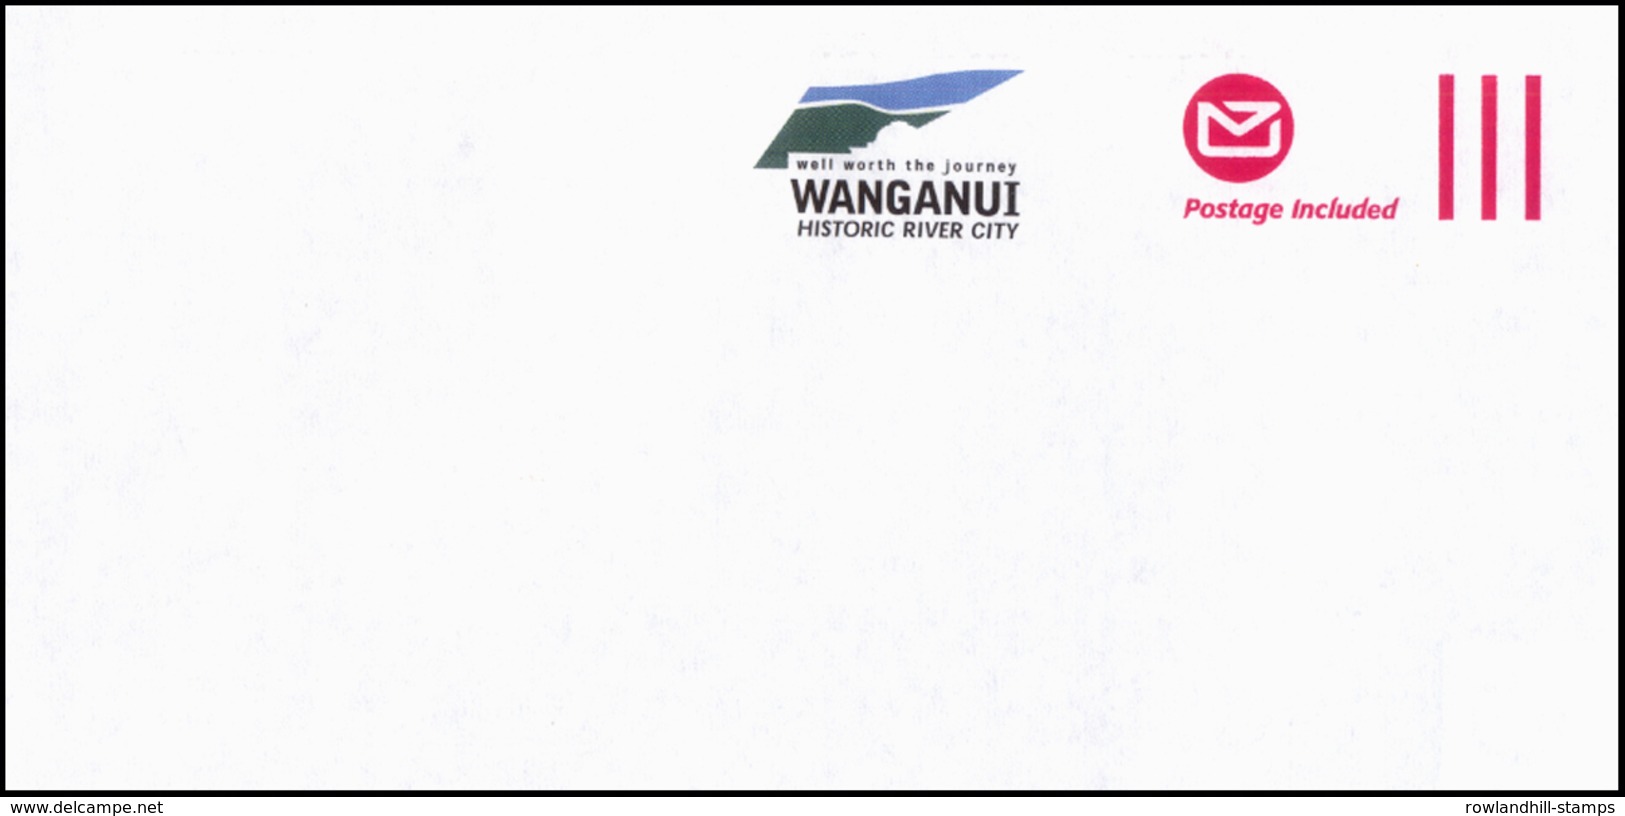 New Zealand, Official Postal Envelope, Stationery Prepaid Postage Included, Unused, WANGANUI, Historic River City Nature - Entiers Postaux